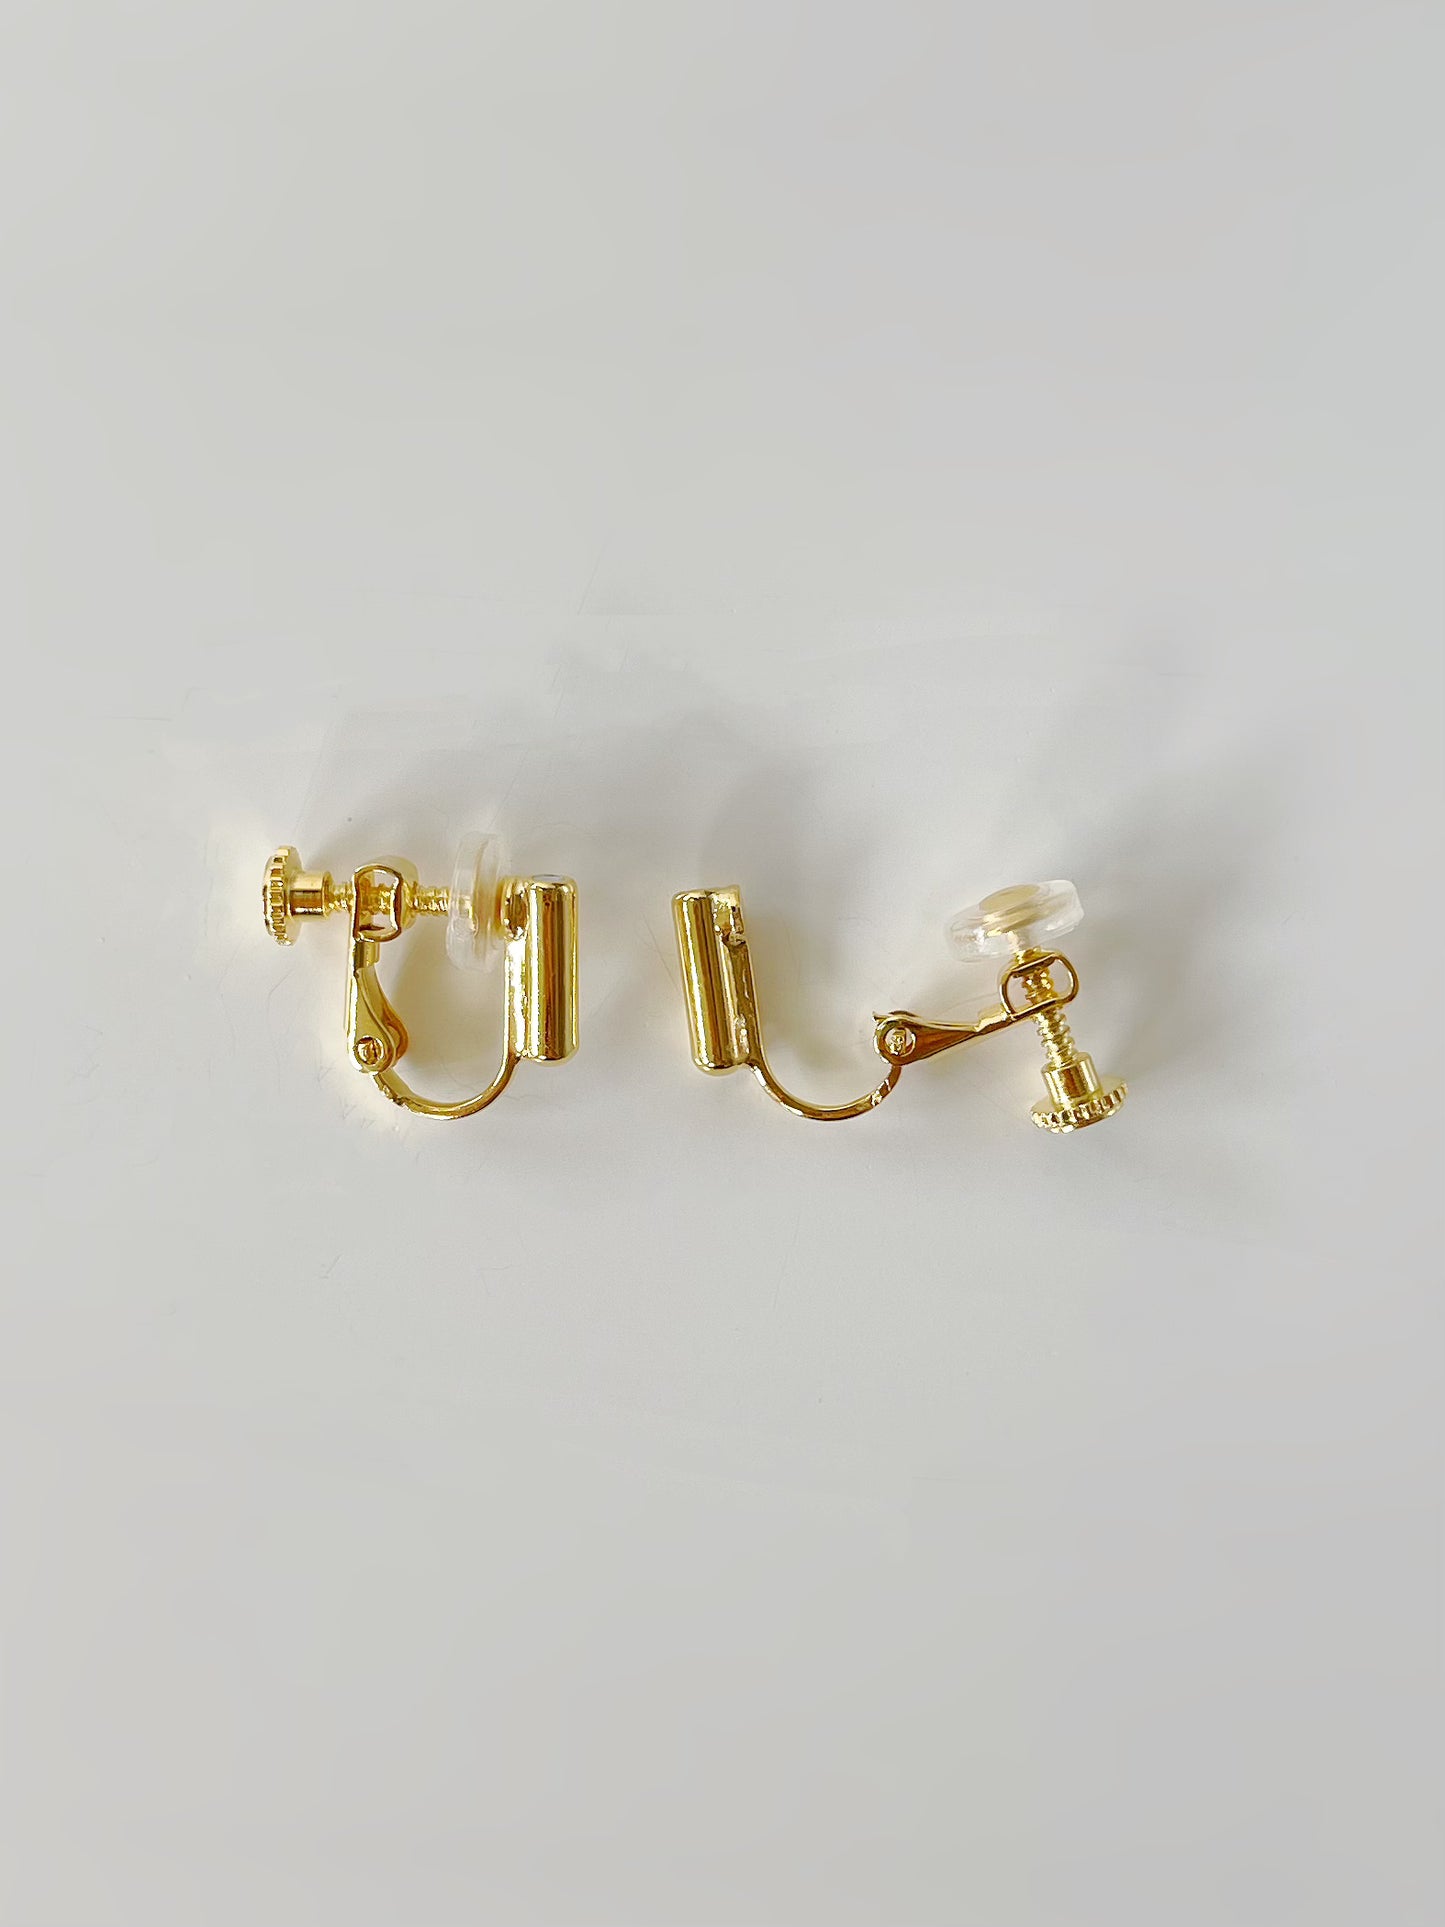 Gold Clip On With Silicon Earrings Converters – Belly Bear Workshop